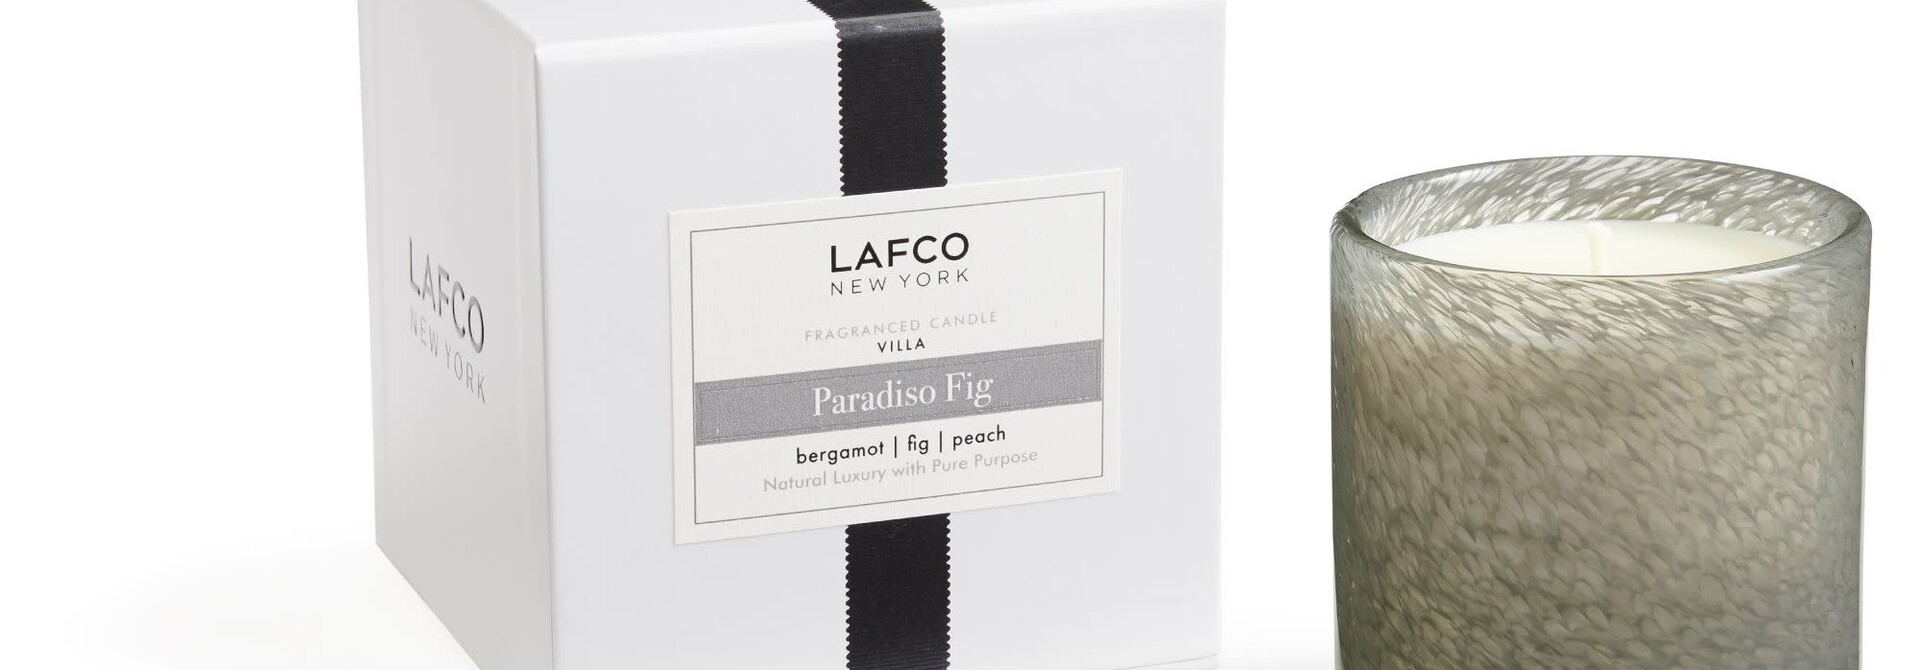 Paradiso Fig | The Signature Candle Collection, 15.5 Oz